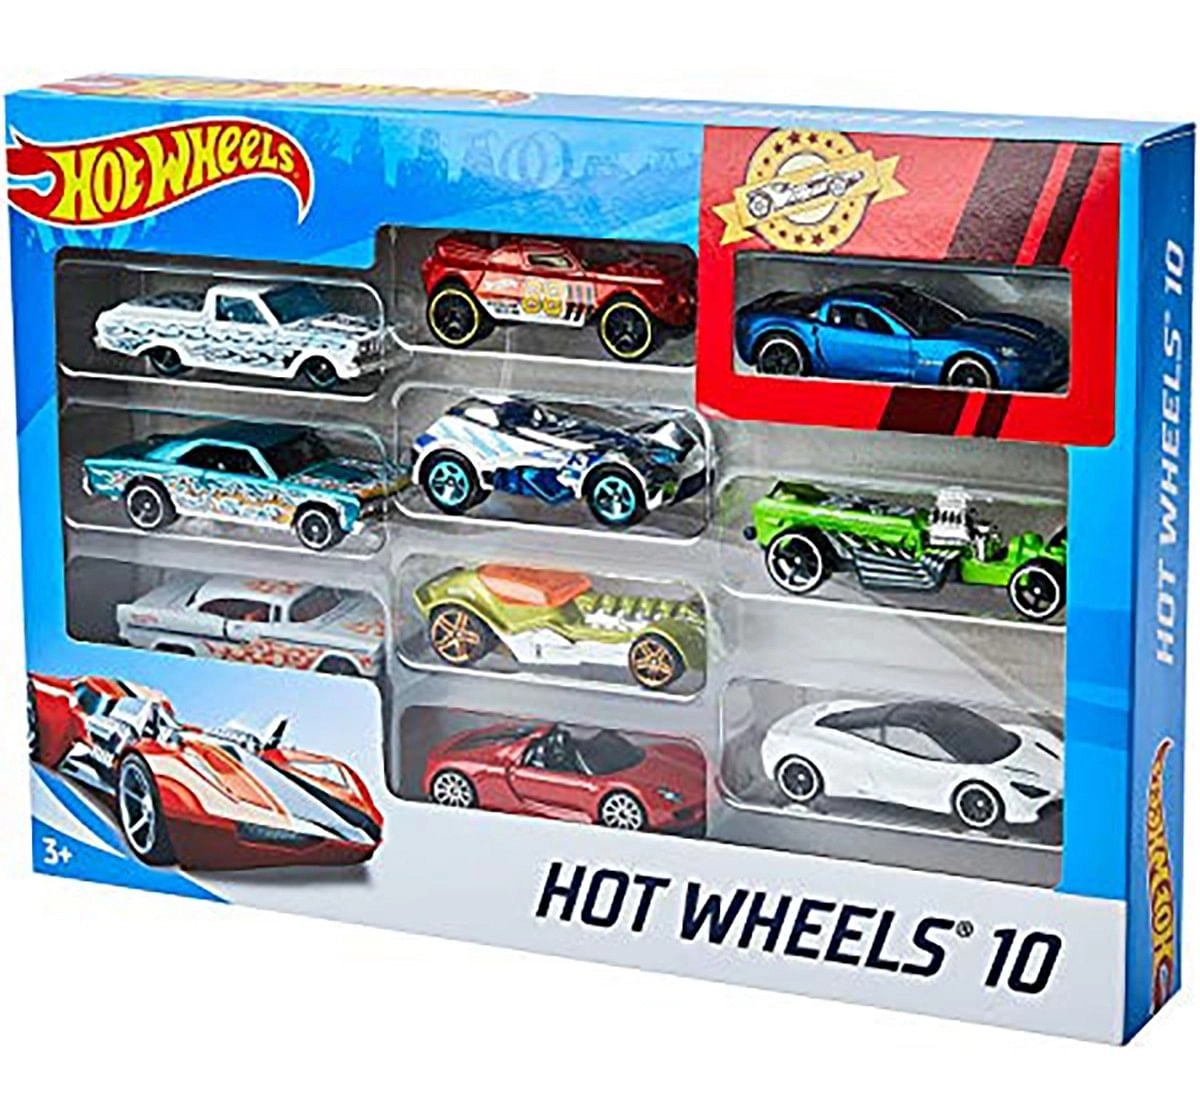 Hot Wheels Die Cast Cars Pack of 10 Vehicles for Kids age 3Y+, Assorted